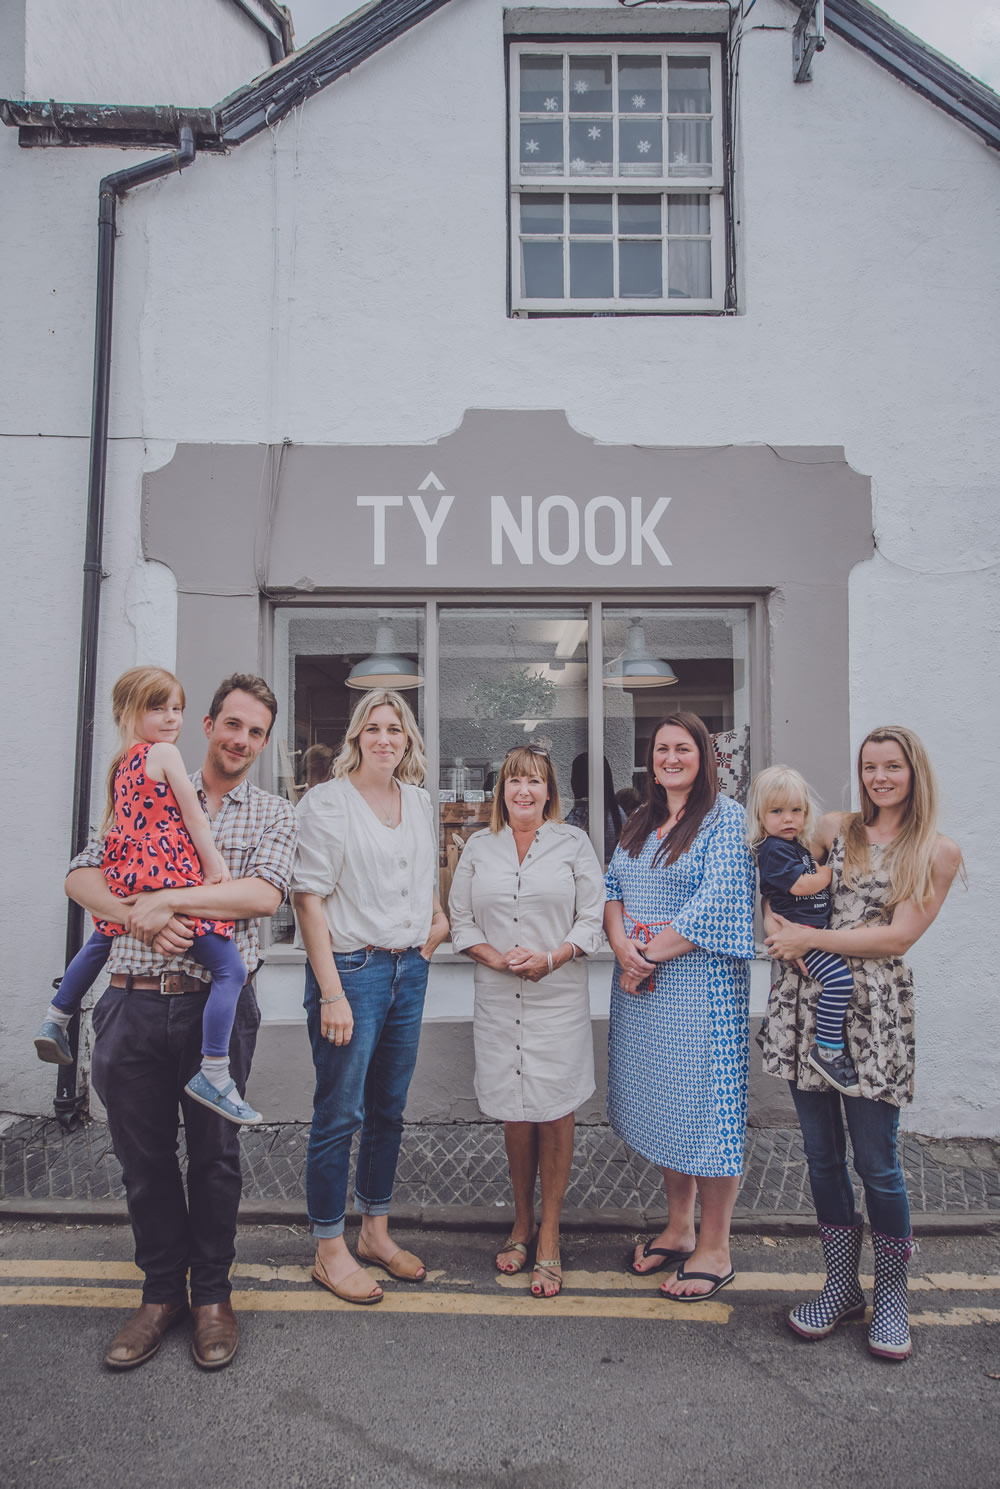 The Ty Nook team